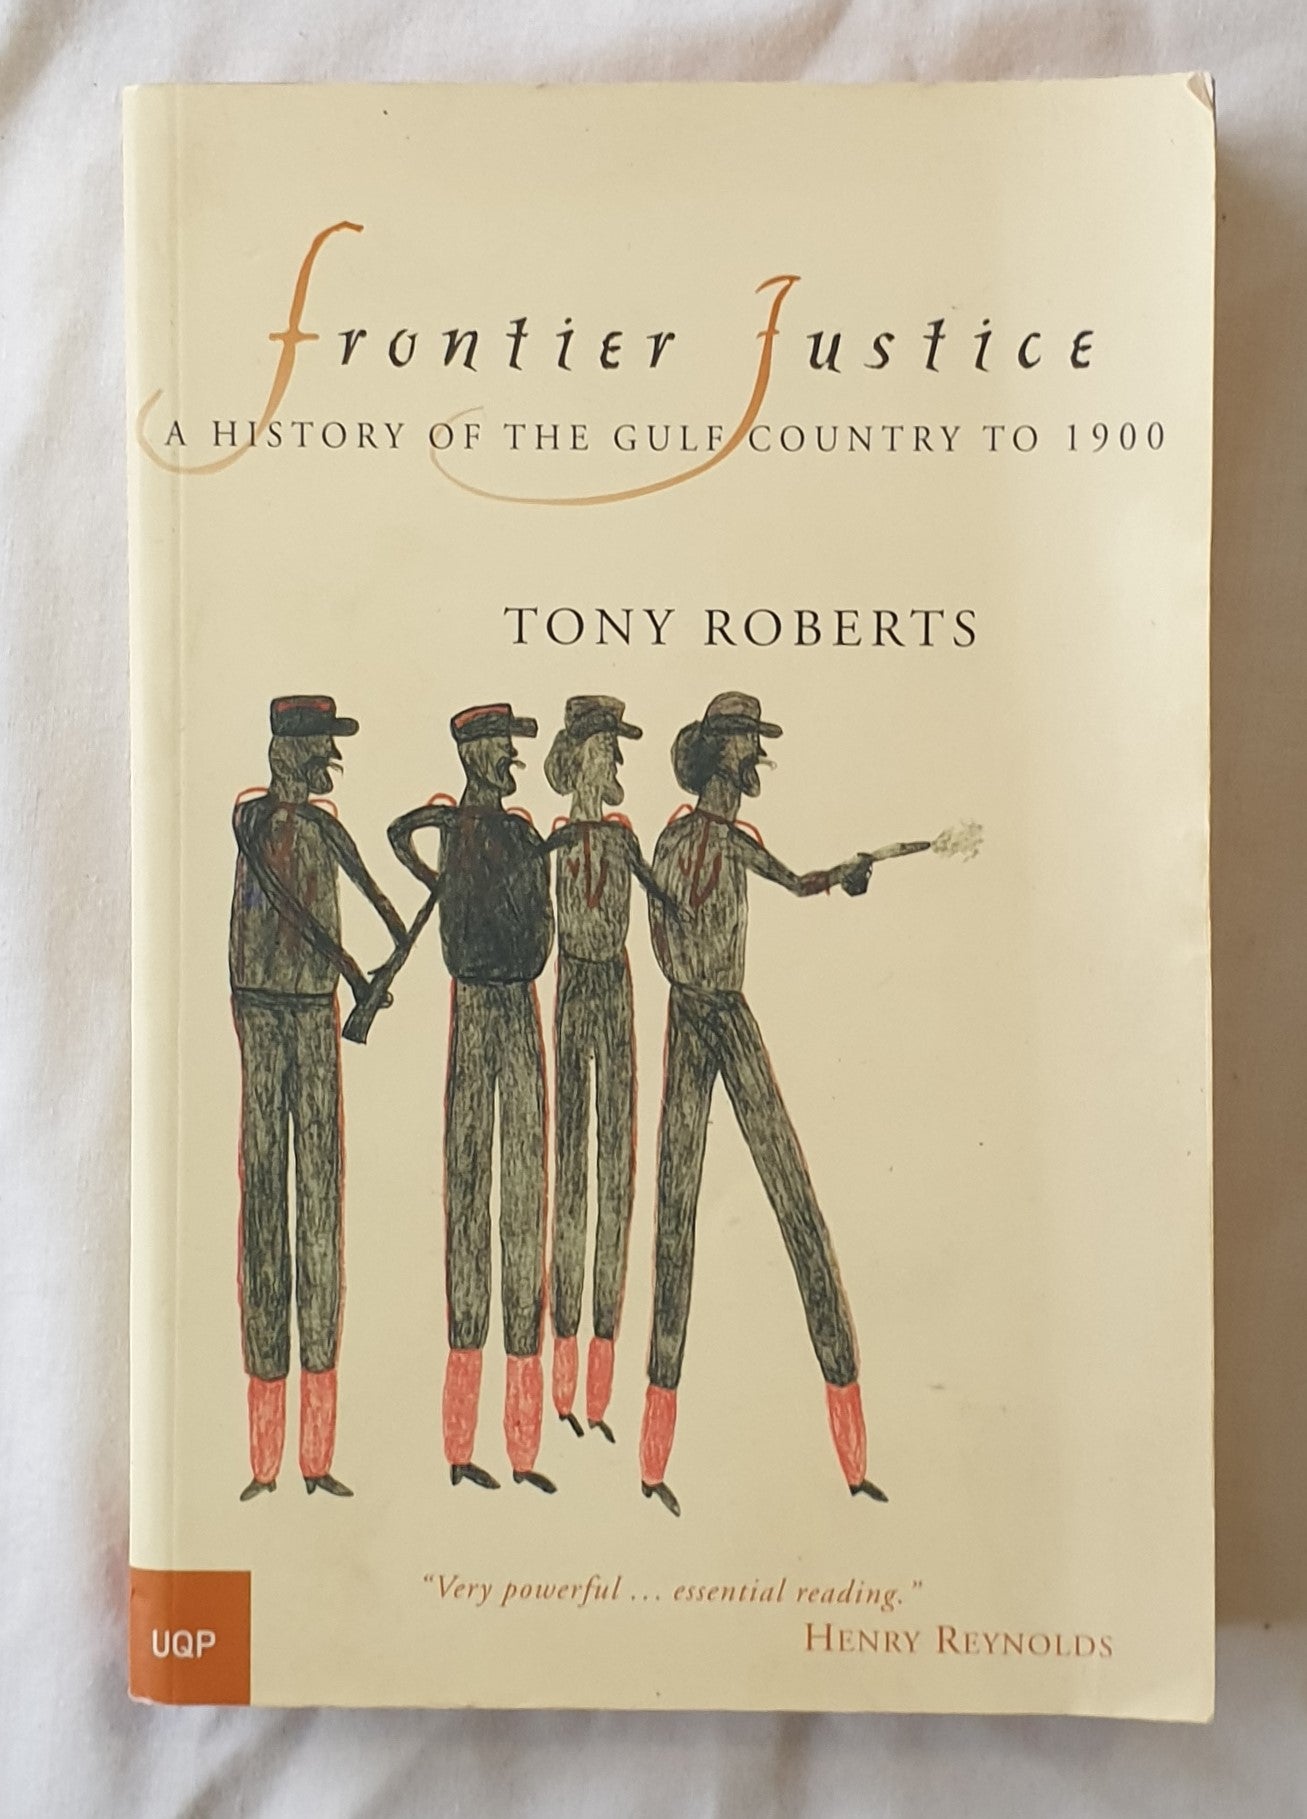 Frontier Justice  A History of the Gulf Country to 1900  by Tony Roberts